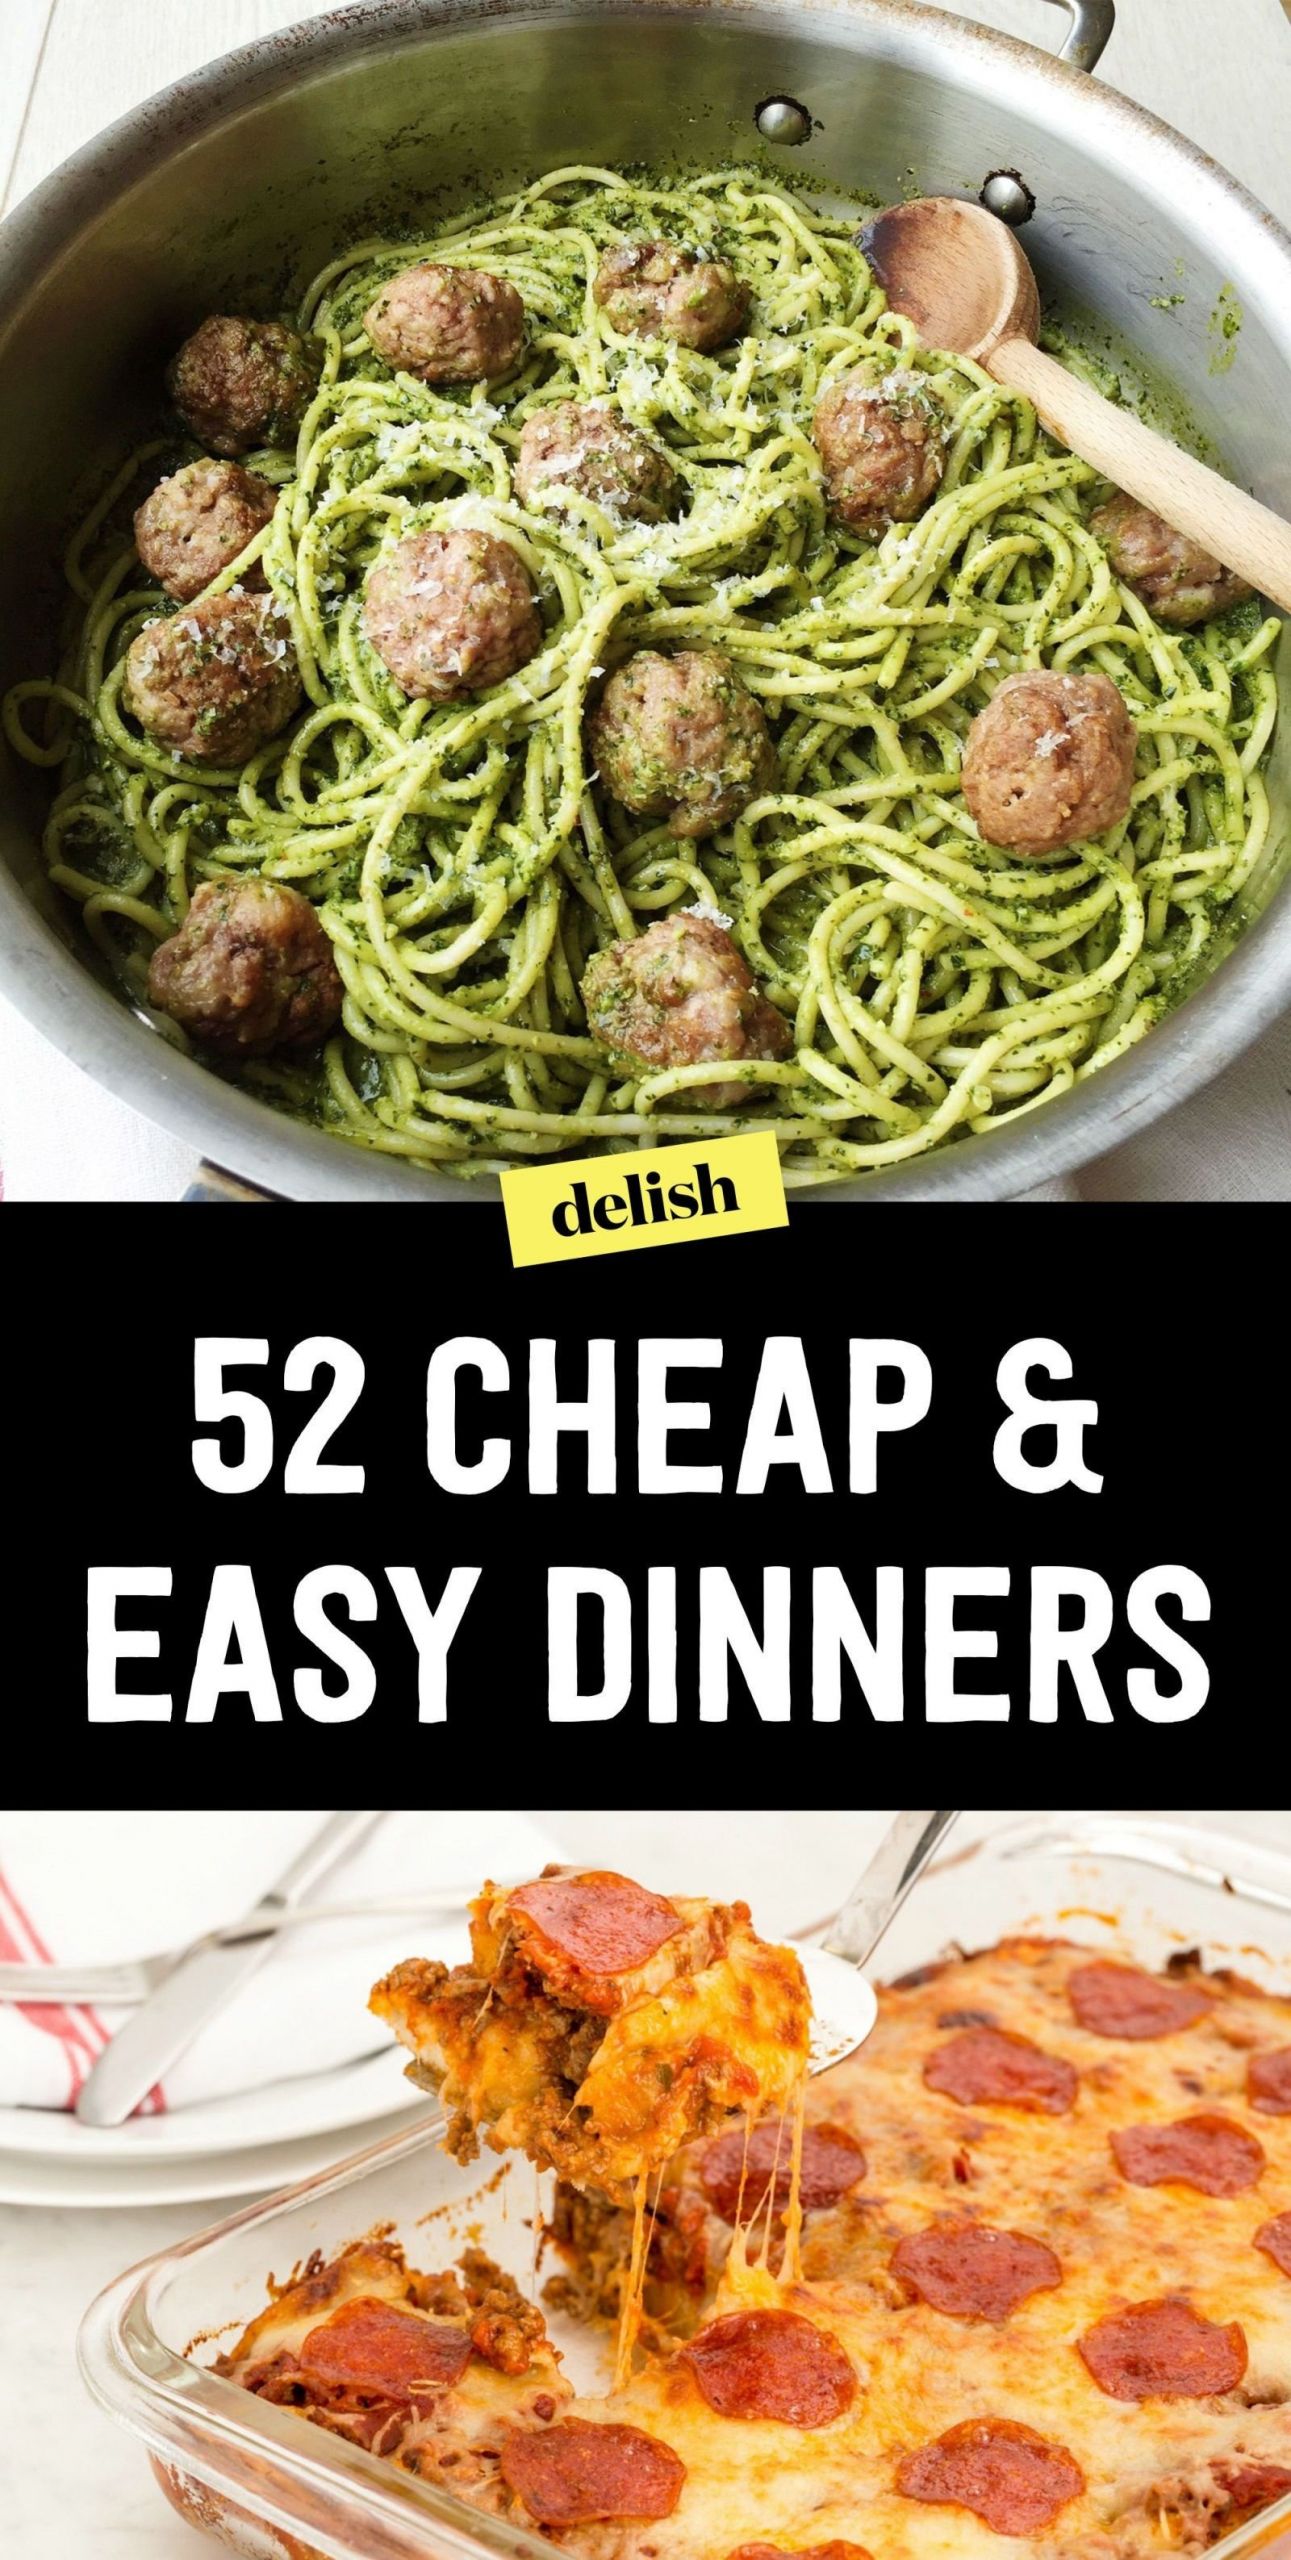 Easy And Cheap Dinner Ideas
 10 Great Cheap Meal Ideas For 2 2019